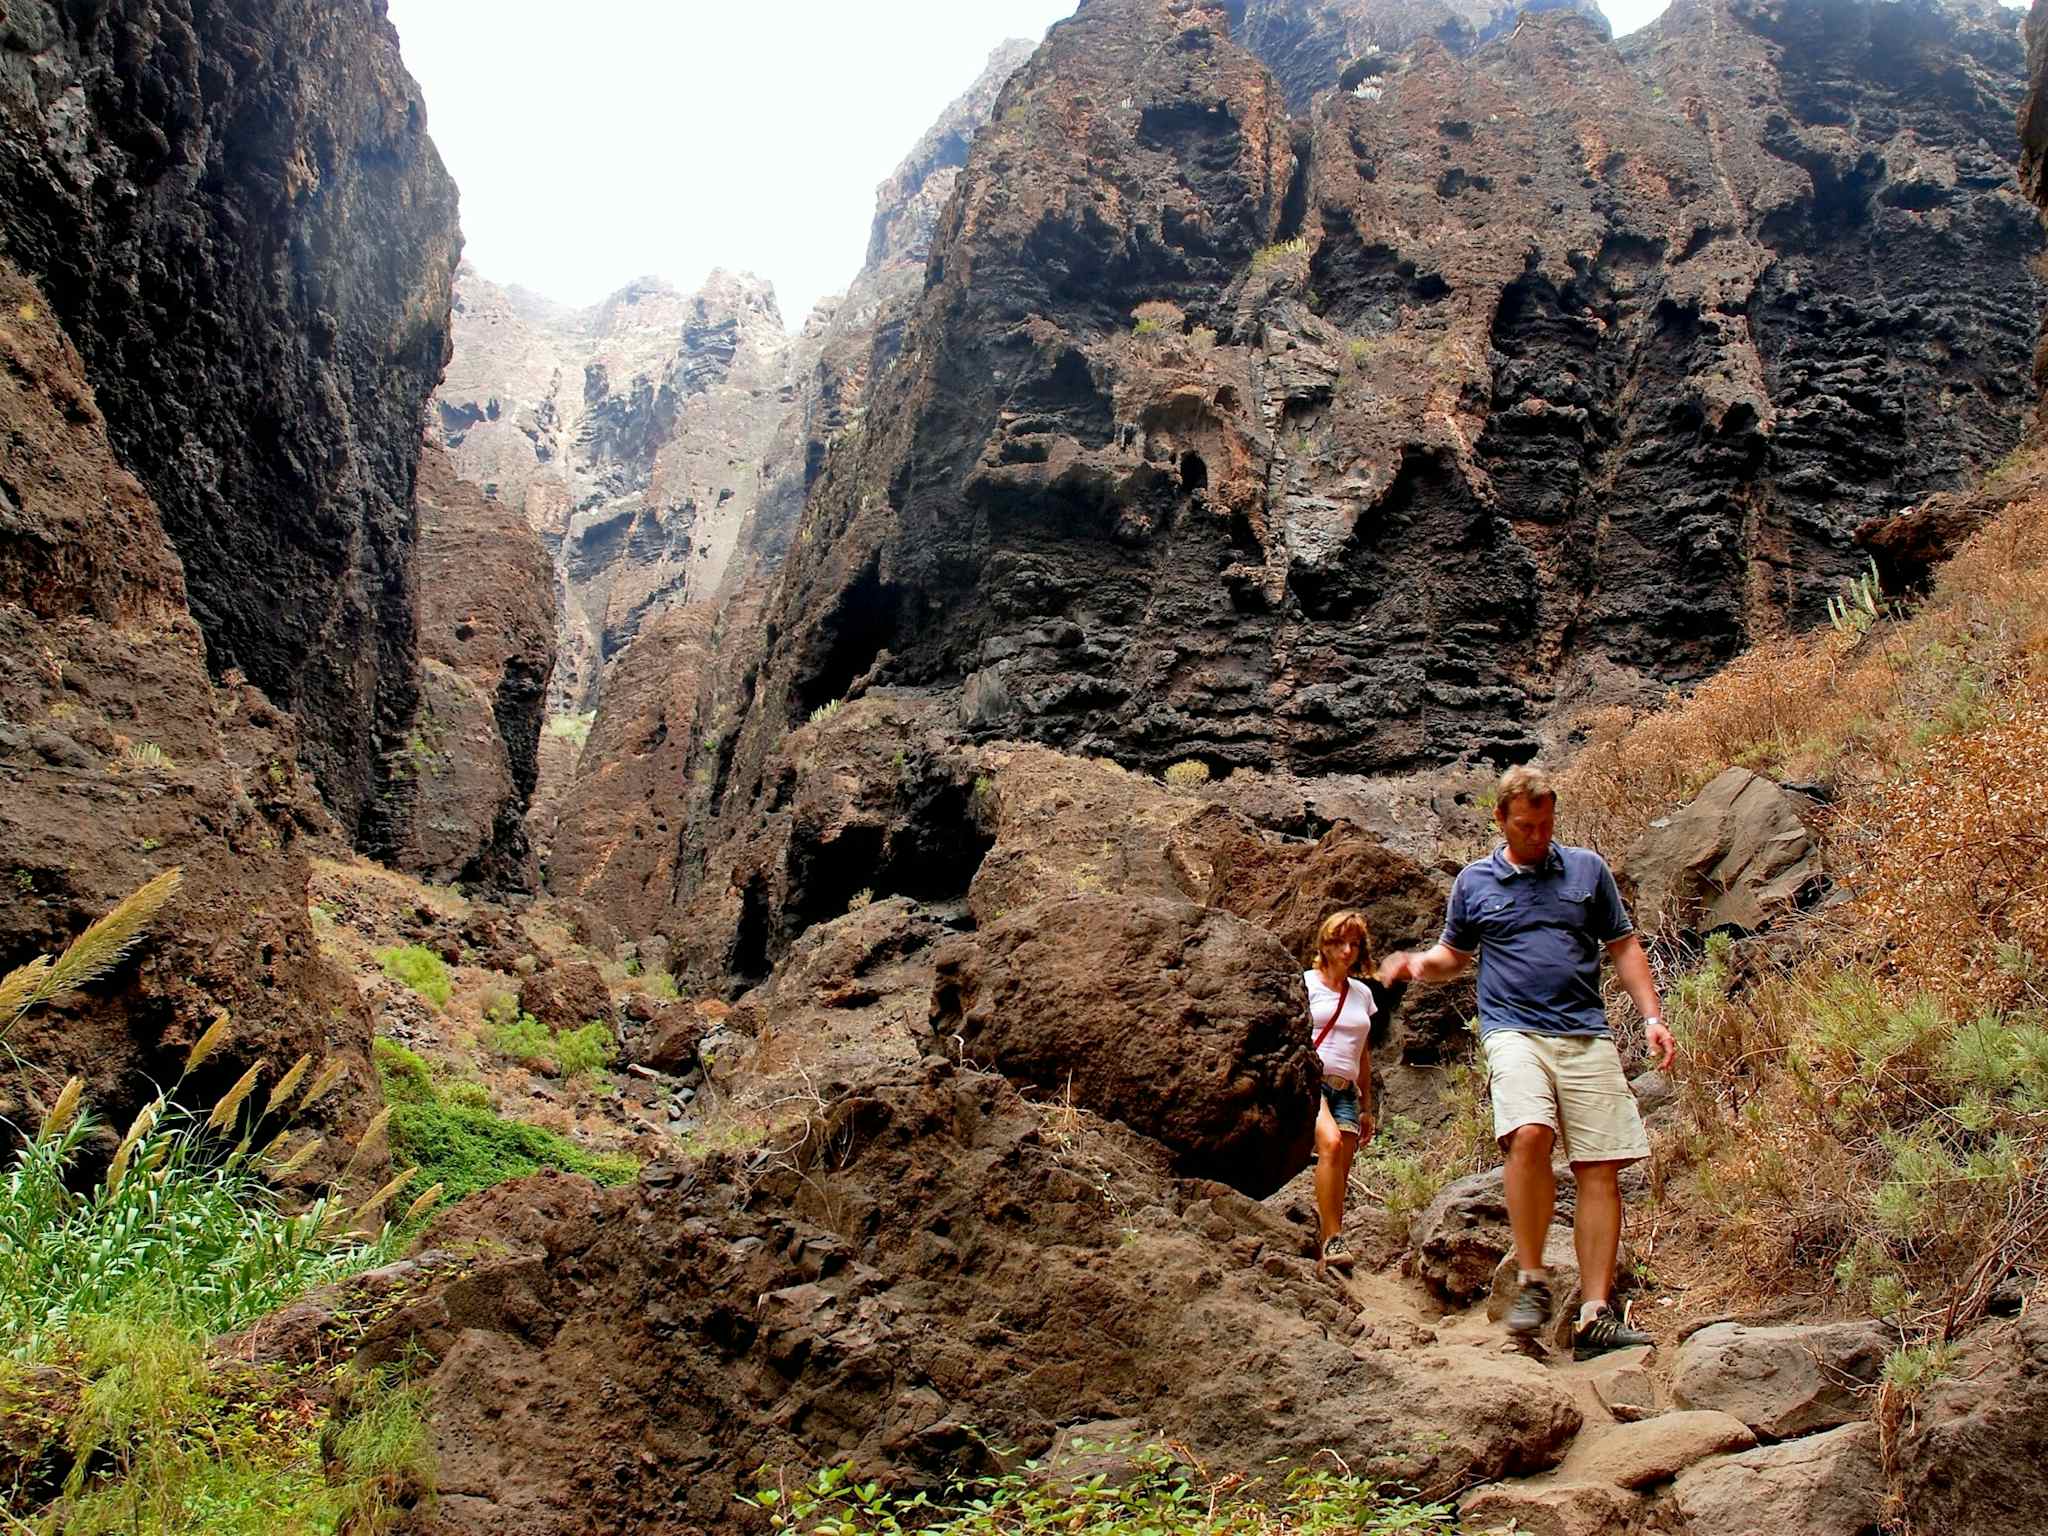 Two people hiking through a canyon